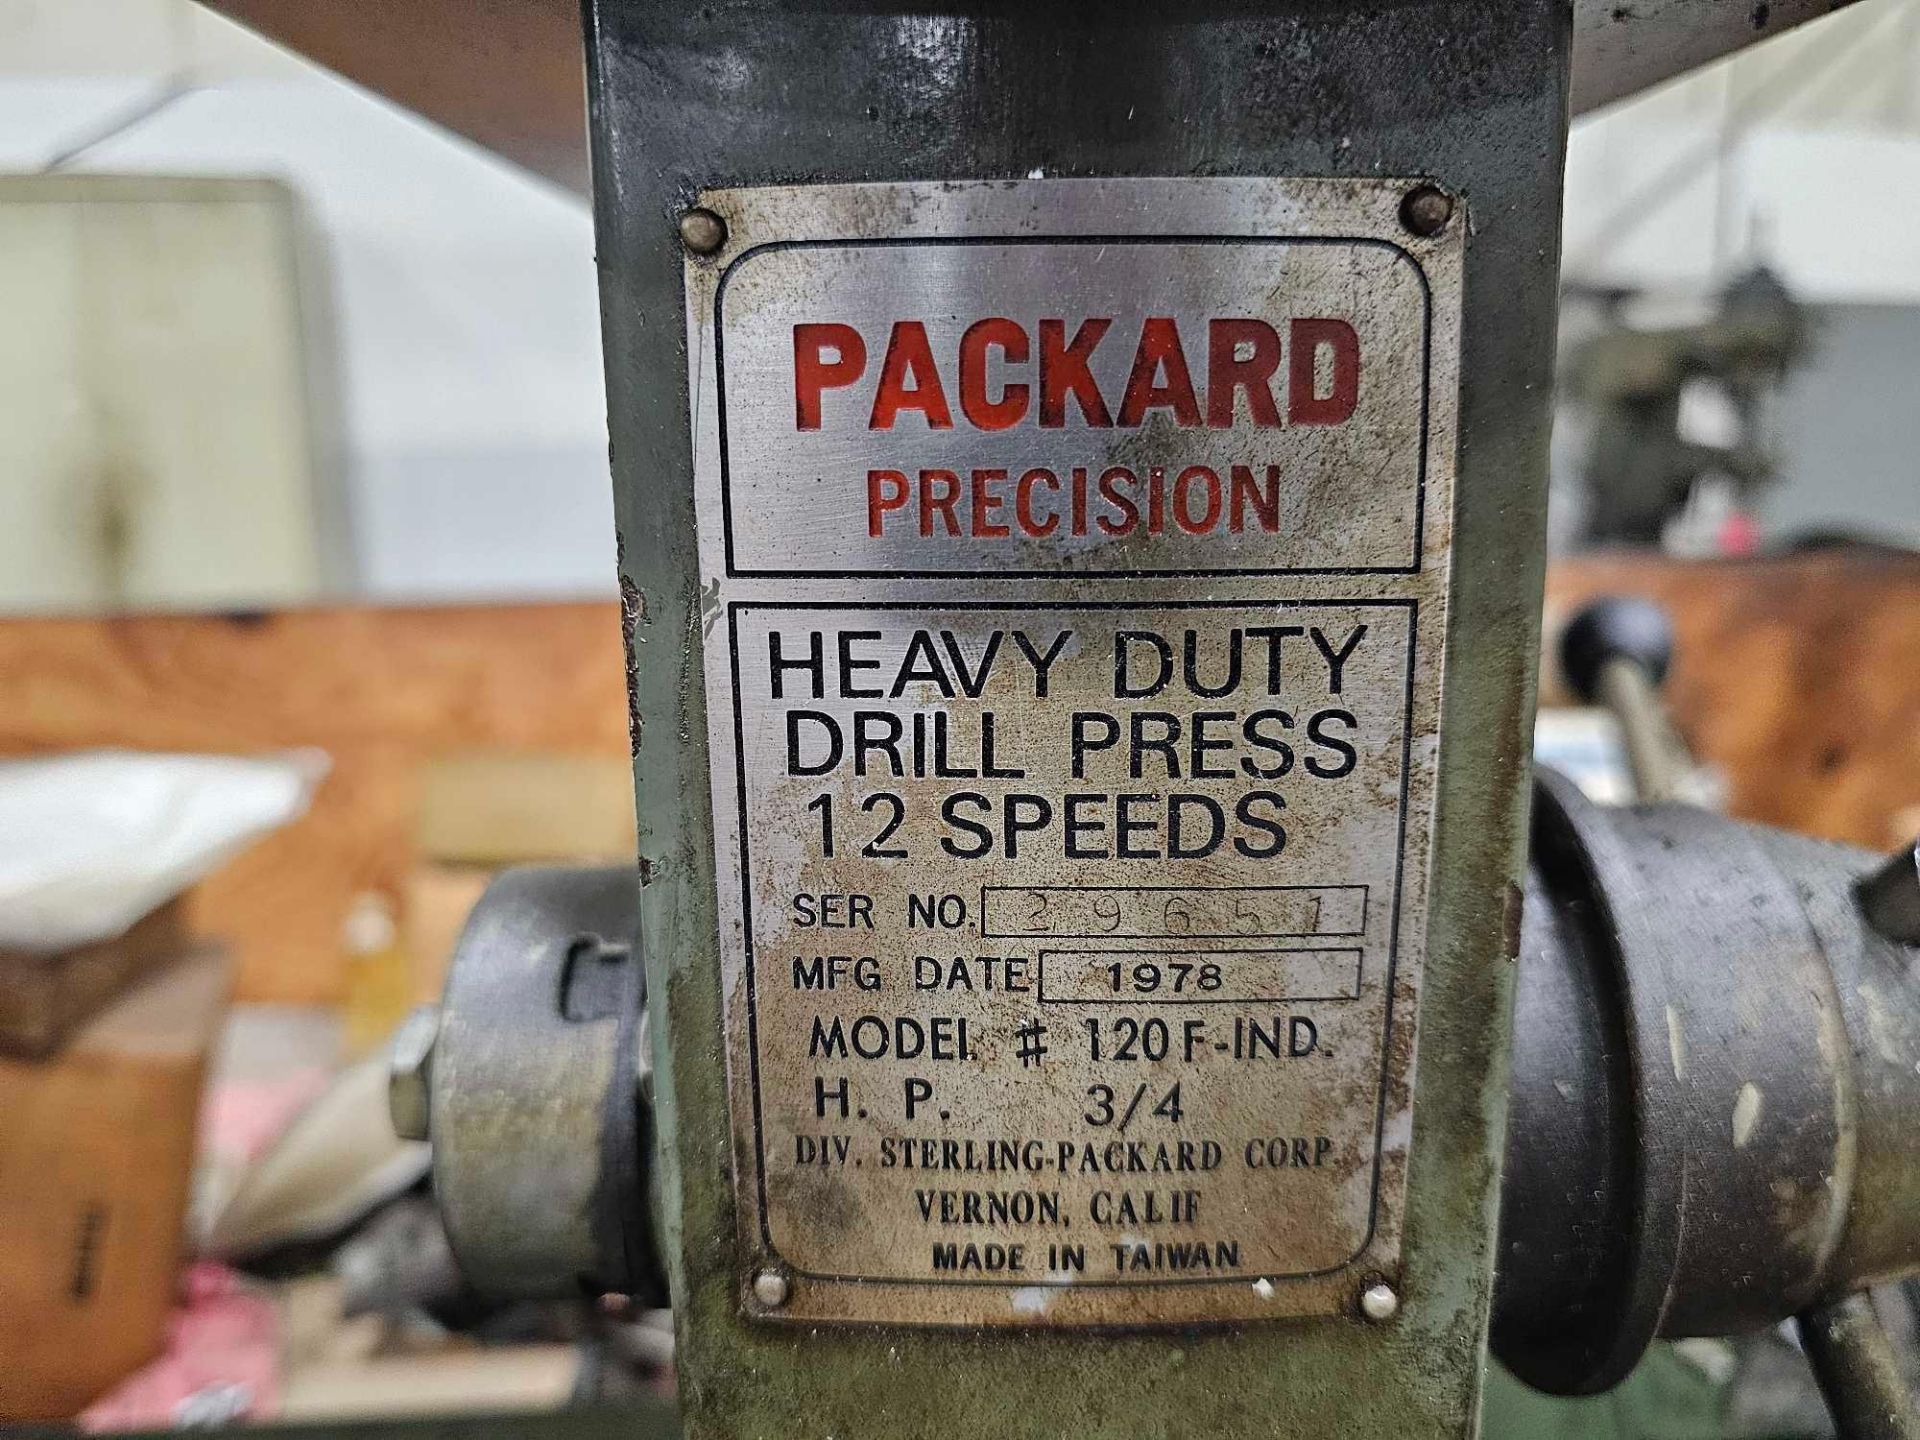 PACKARD PRECISION 12 SPEED DRILL PRESS - Image 7 of 7